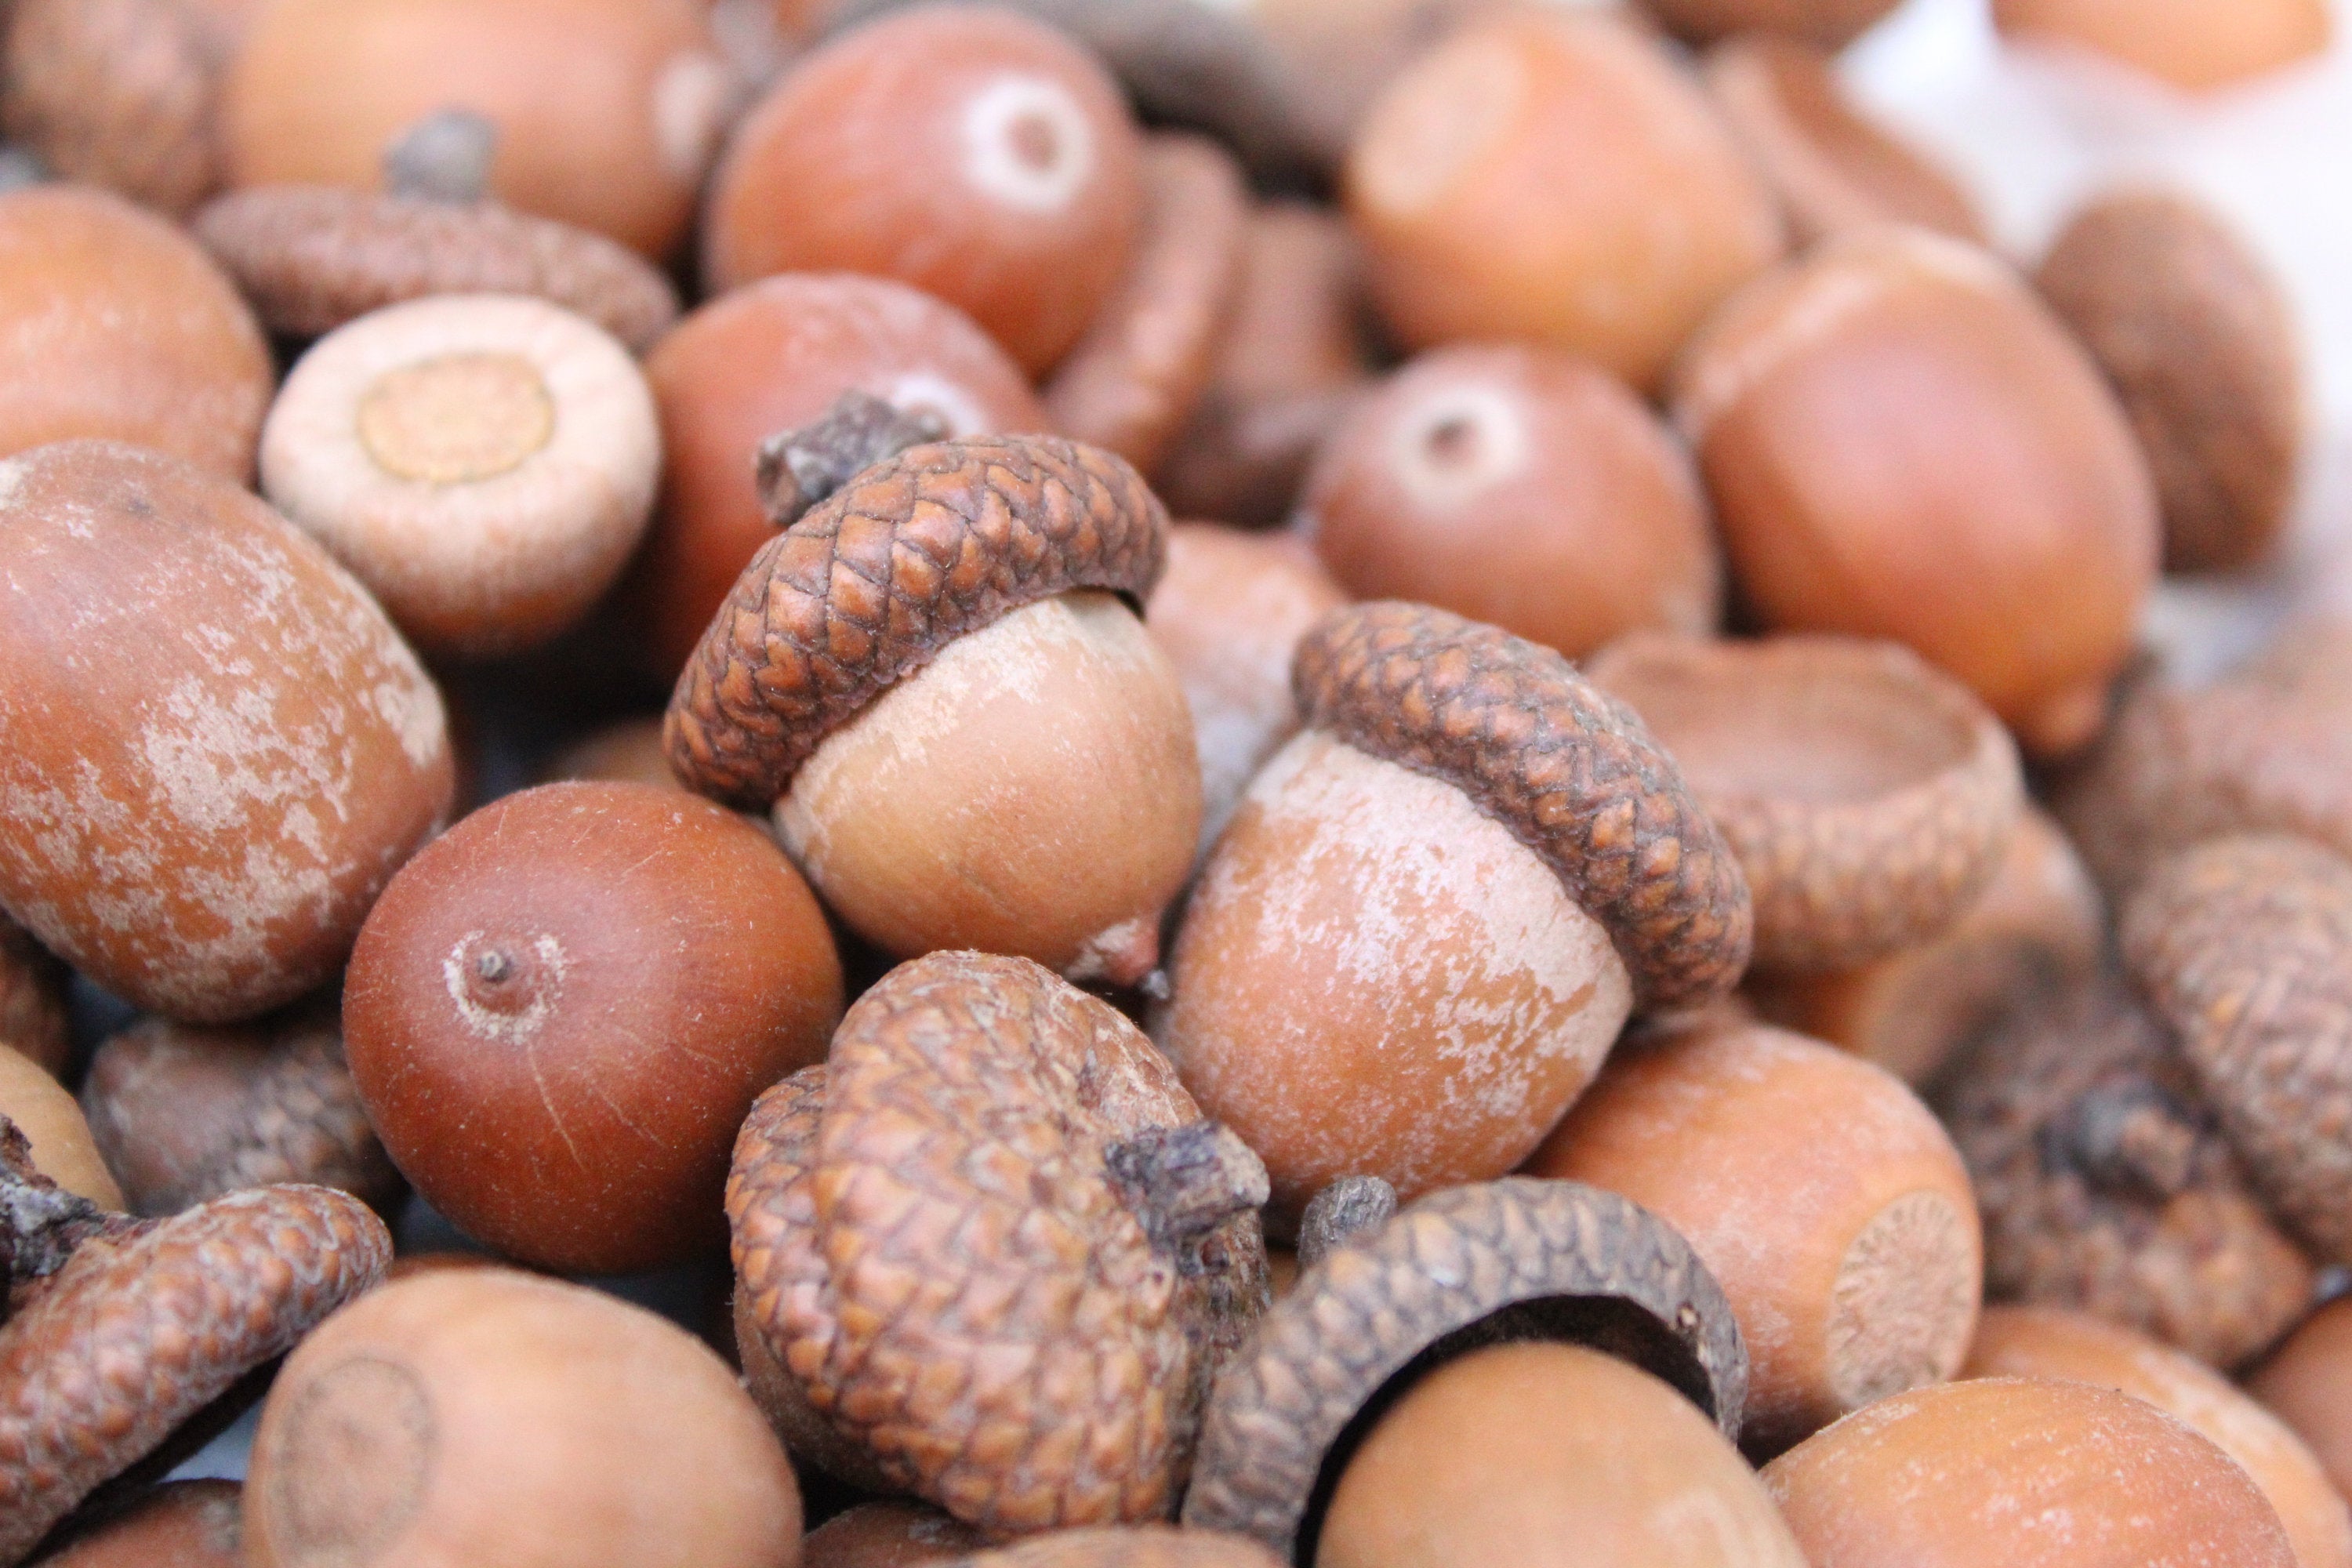 Dried Acorns With Caps, High Quality, Natural, Organic, Biodegraddable, Craft, Home Decoration, Christmas Decor